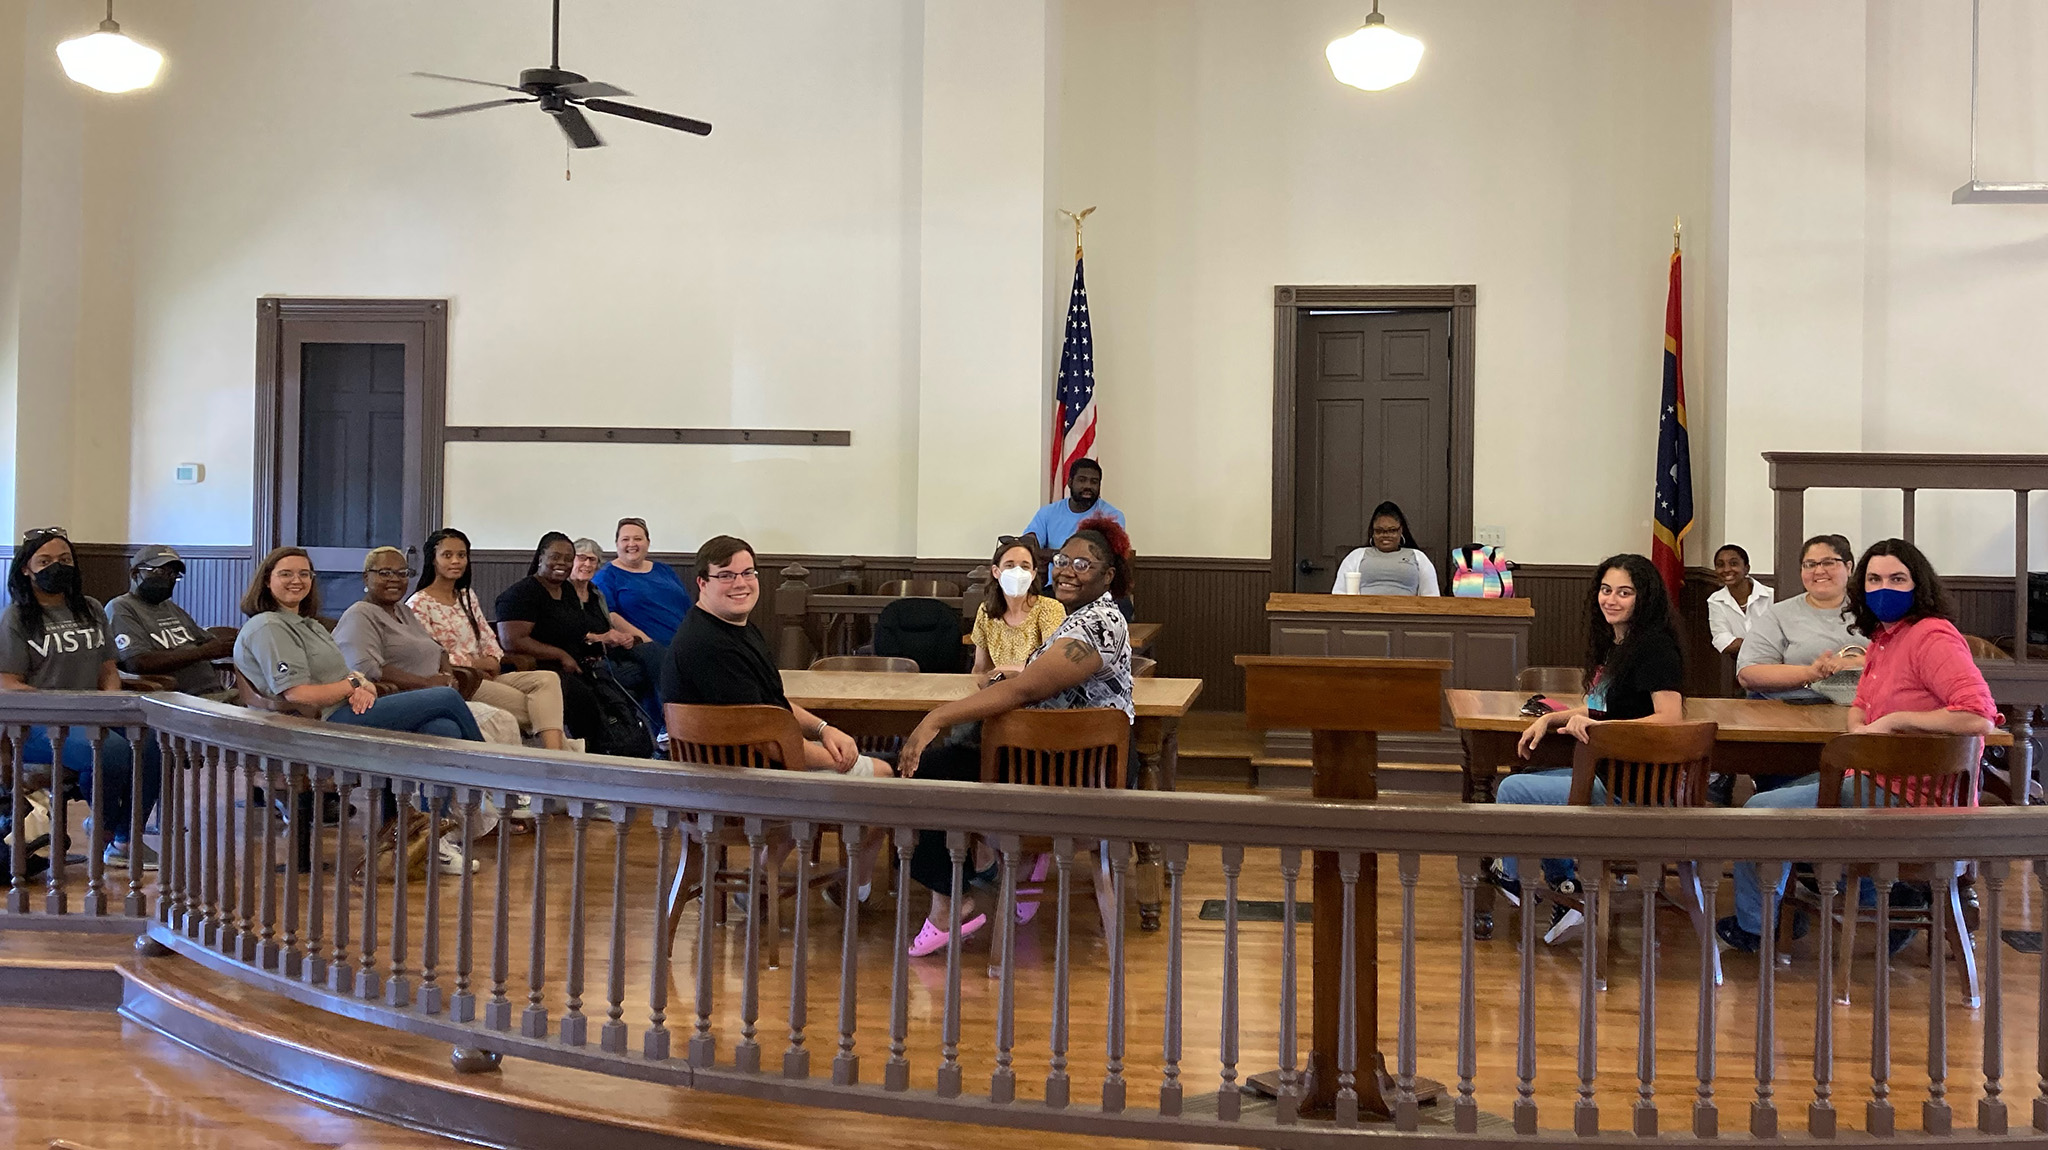 Members of the North Mississippi VISTA Project learn about the Emmett Till case in the courthouse where the trial for Till’s murder took place in Sumner. The visit was part of a tour of Mississippi Delta sites for the VISTAs. Submitted photo